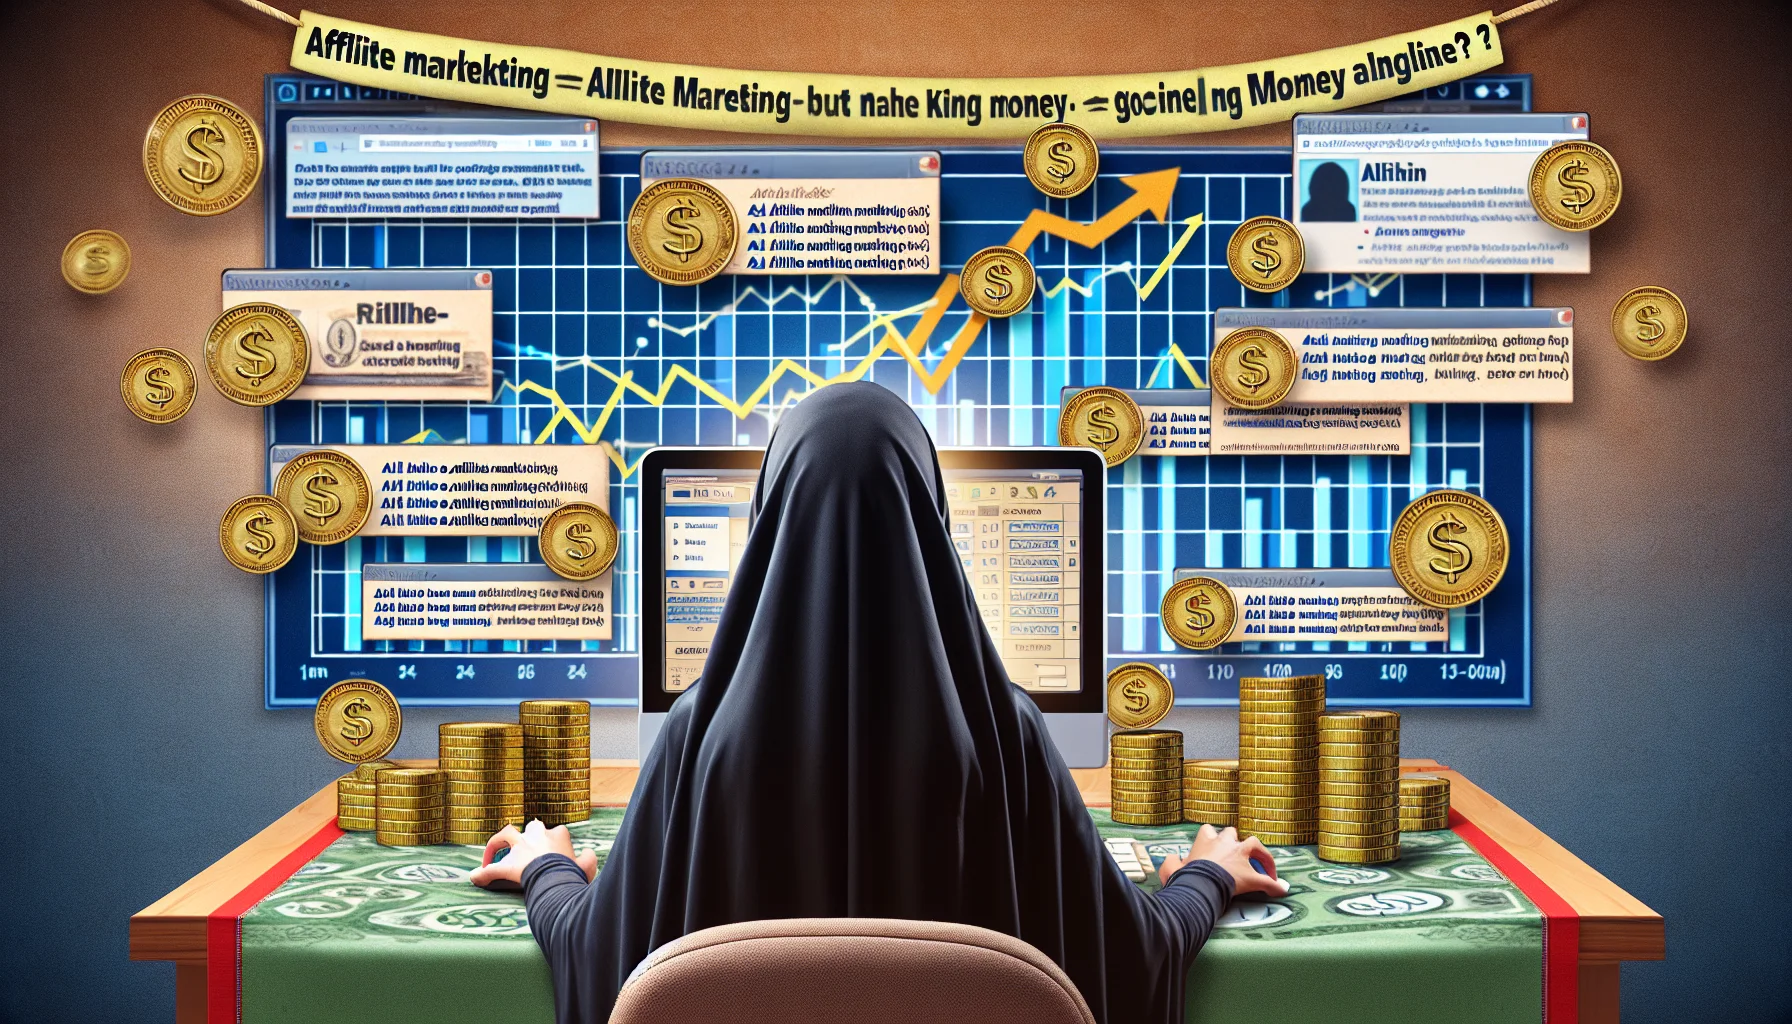 Generate an image with a comedic spin, depicting the concept of affiliate marketing in relation to making money online. Focus on realism but maintain the intrigue. Show a person - perhaps a Middle-Eastern female, sitting at a computer desk filled with graphs showing rising earnings. However, only show the person from behind to keep her identity hidden. Also visualize clicking links leading to different websites, each link represented by a gold coin to symbolize the potential earnings. In the background, show a ticker tape running with humorous yet encouraging phrases about affiliate marketing.